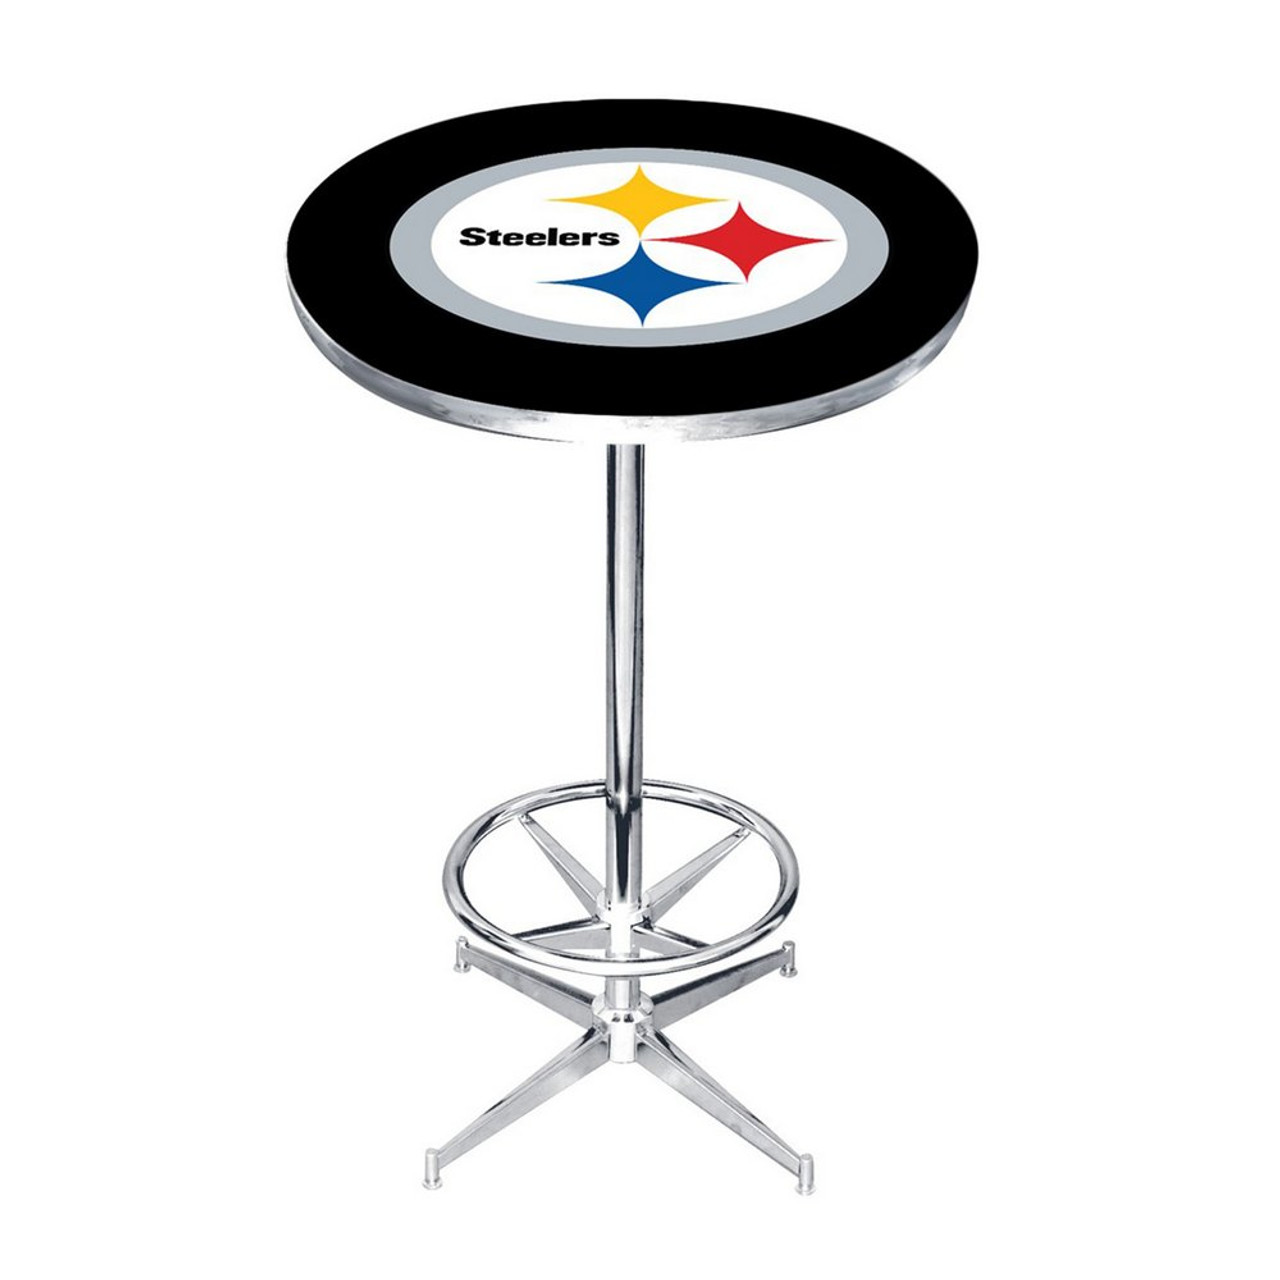 84-3004, Pittsburgh, Steelers, 27", Chrome, Pub Table, FREE SHIPING, Logo, NFL, Imperial